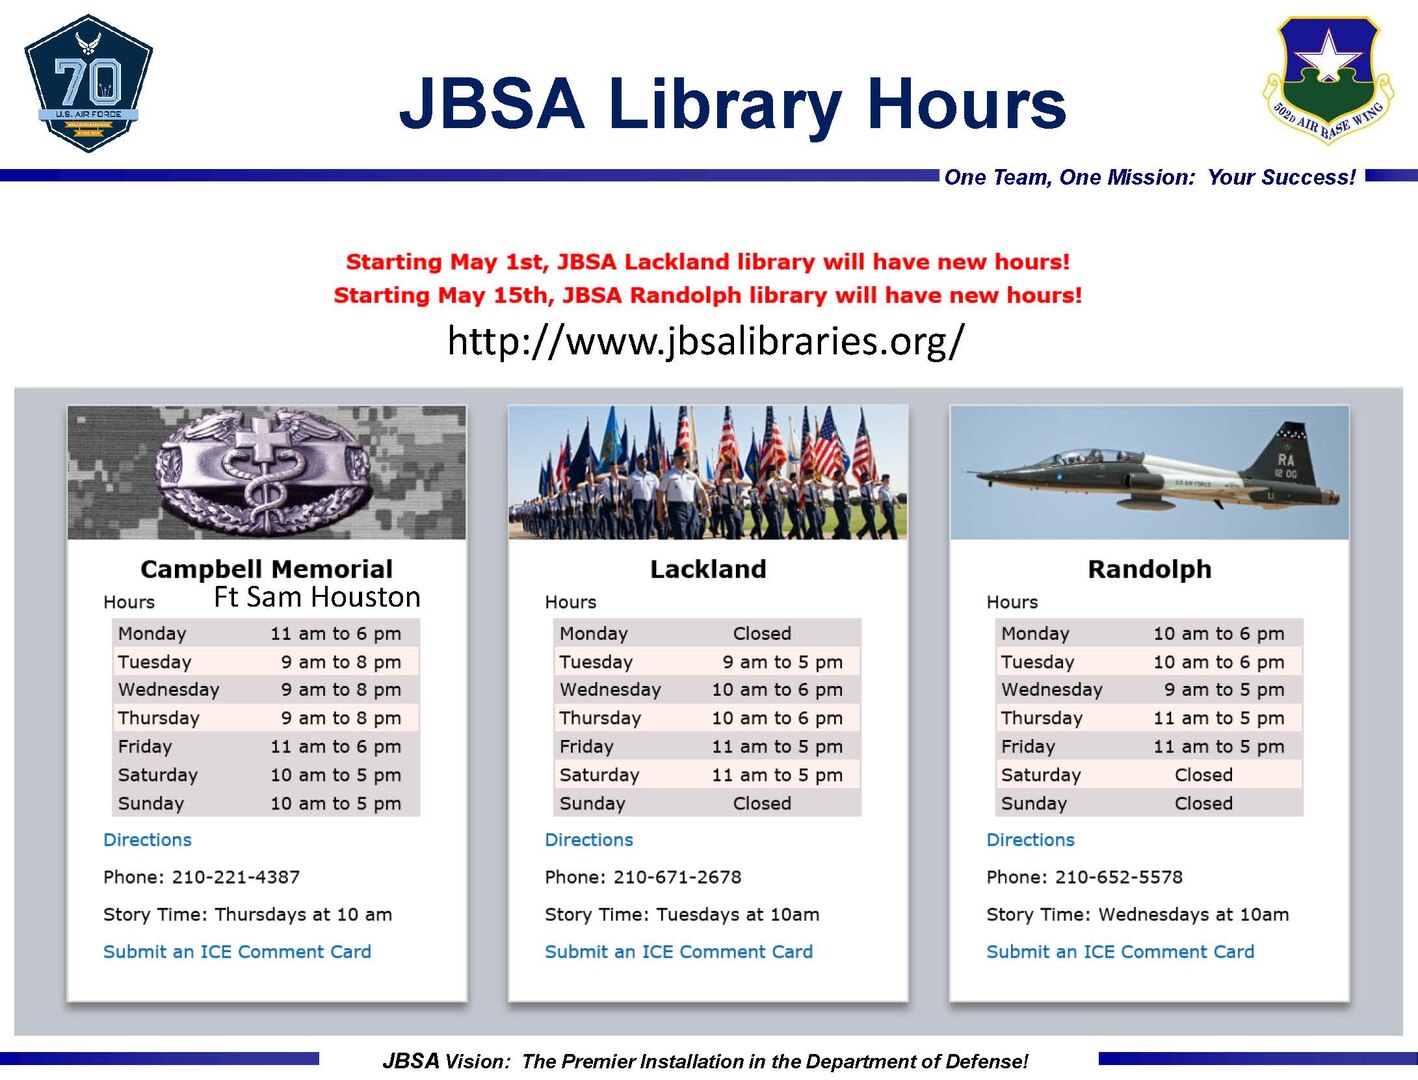 The federal government hiring freeze comes to an end, however, there are still some activities that will continue to be affected as the summer months approach.  The JBSA library staff is working to support servicemembers and their families, but due to decreased manning, JBSA library hours are being adjusted.
